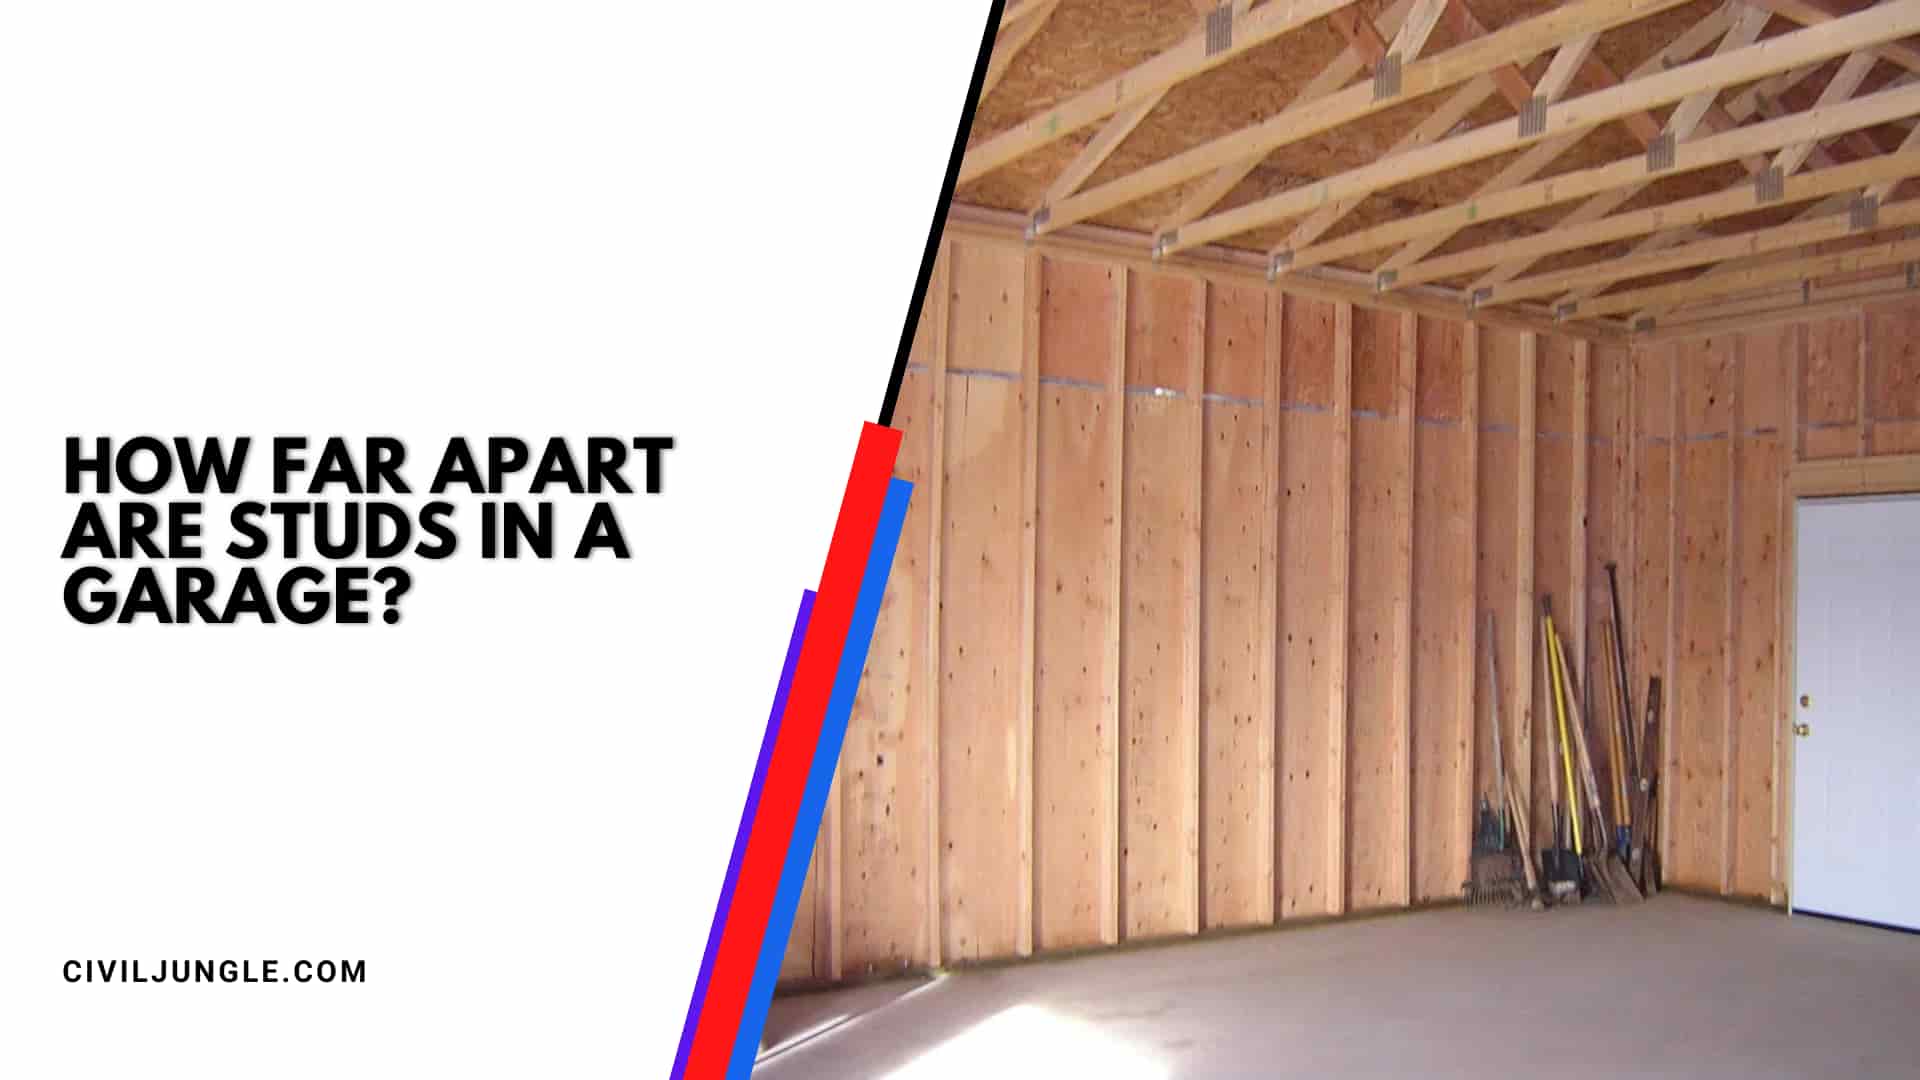 How Far Apart Are Studs in a Garage?